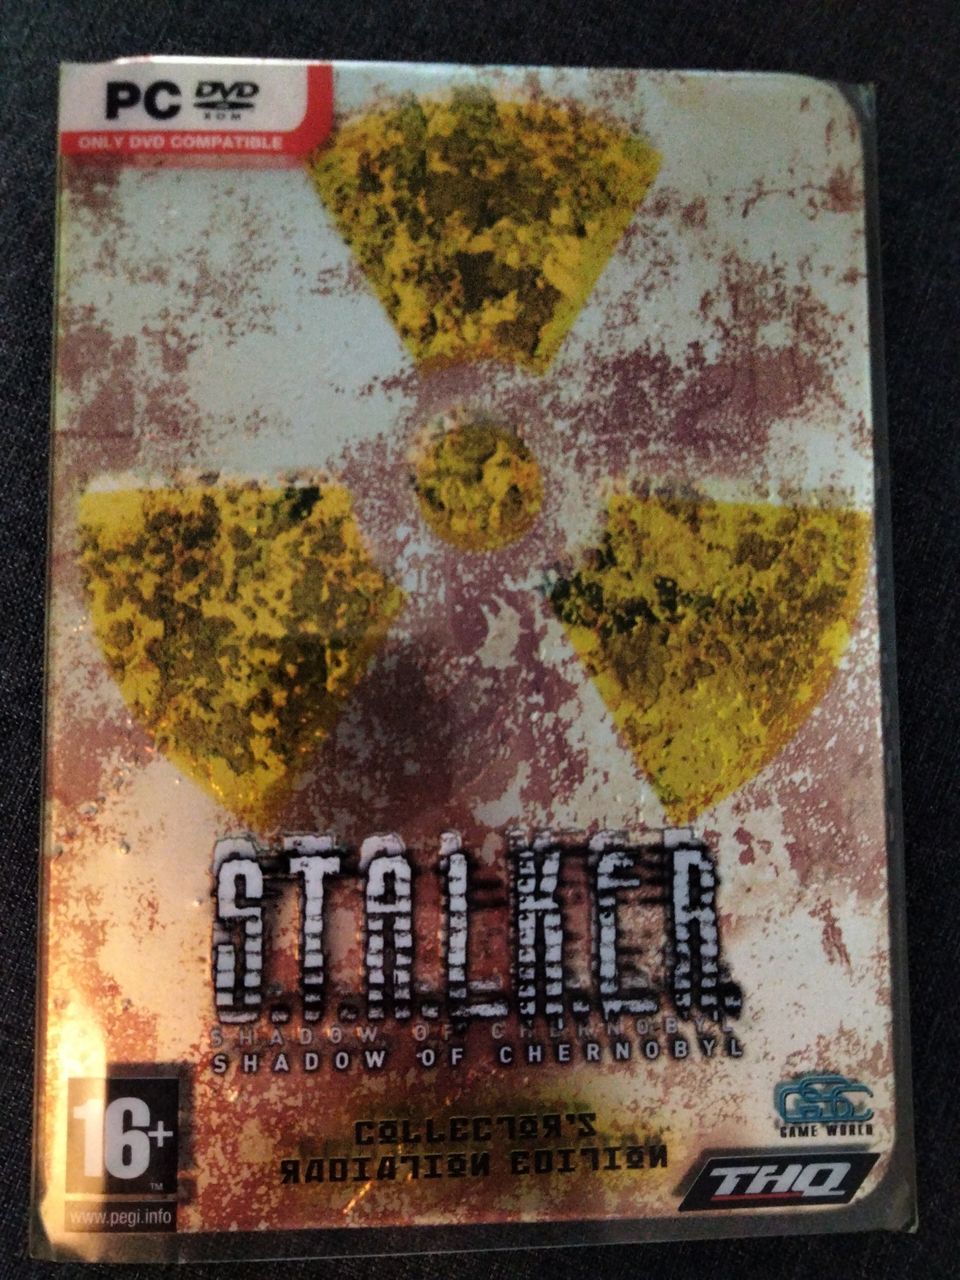 S.T.A.L.K.E.R. Shadow of Chernobyl (Radiation Edition)